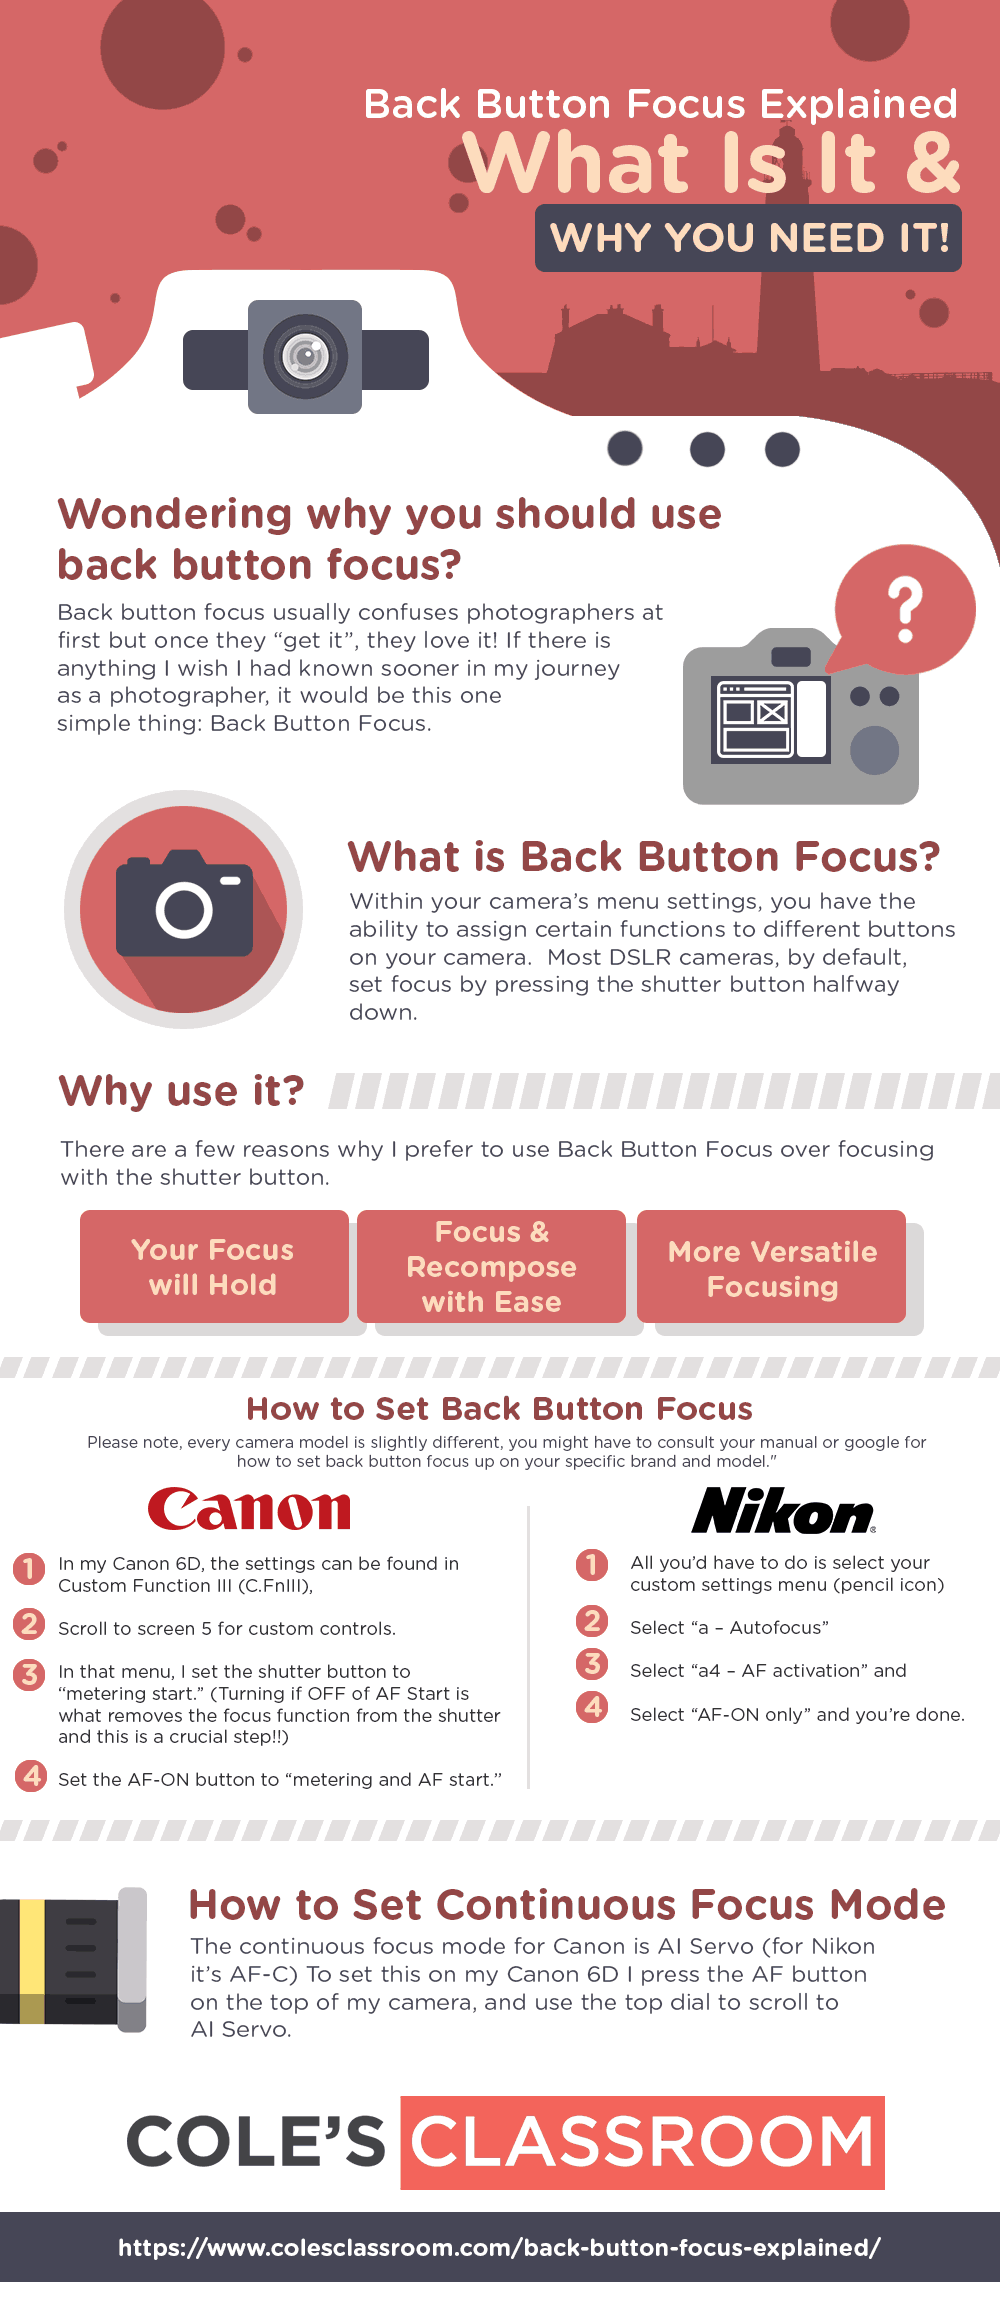 Back Button Focus Explained (What Is It & Why You Need It)